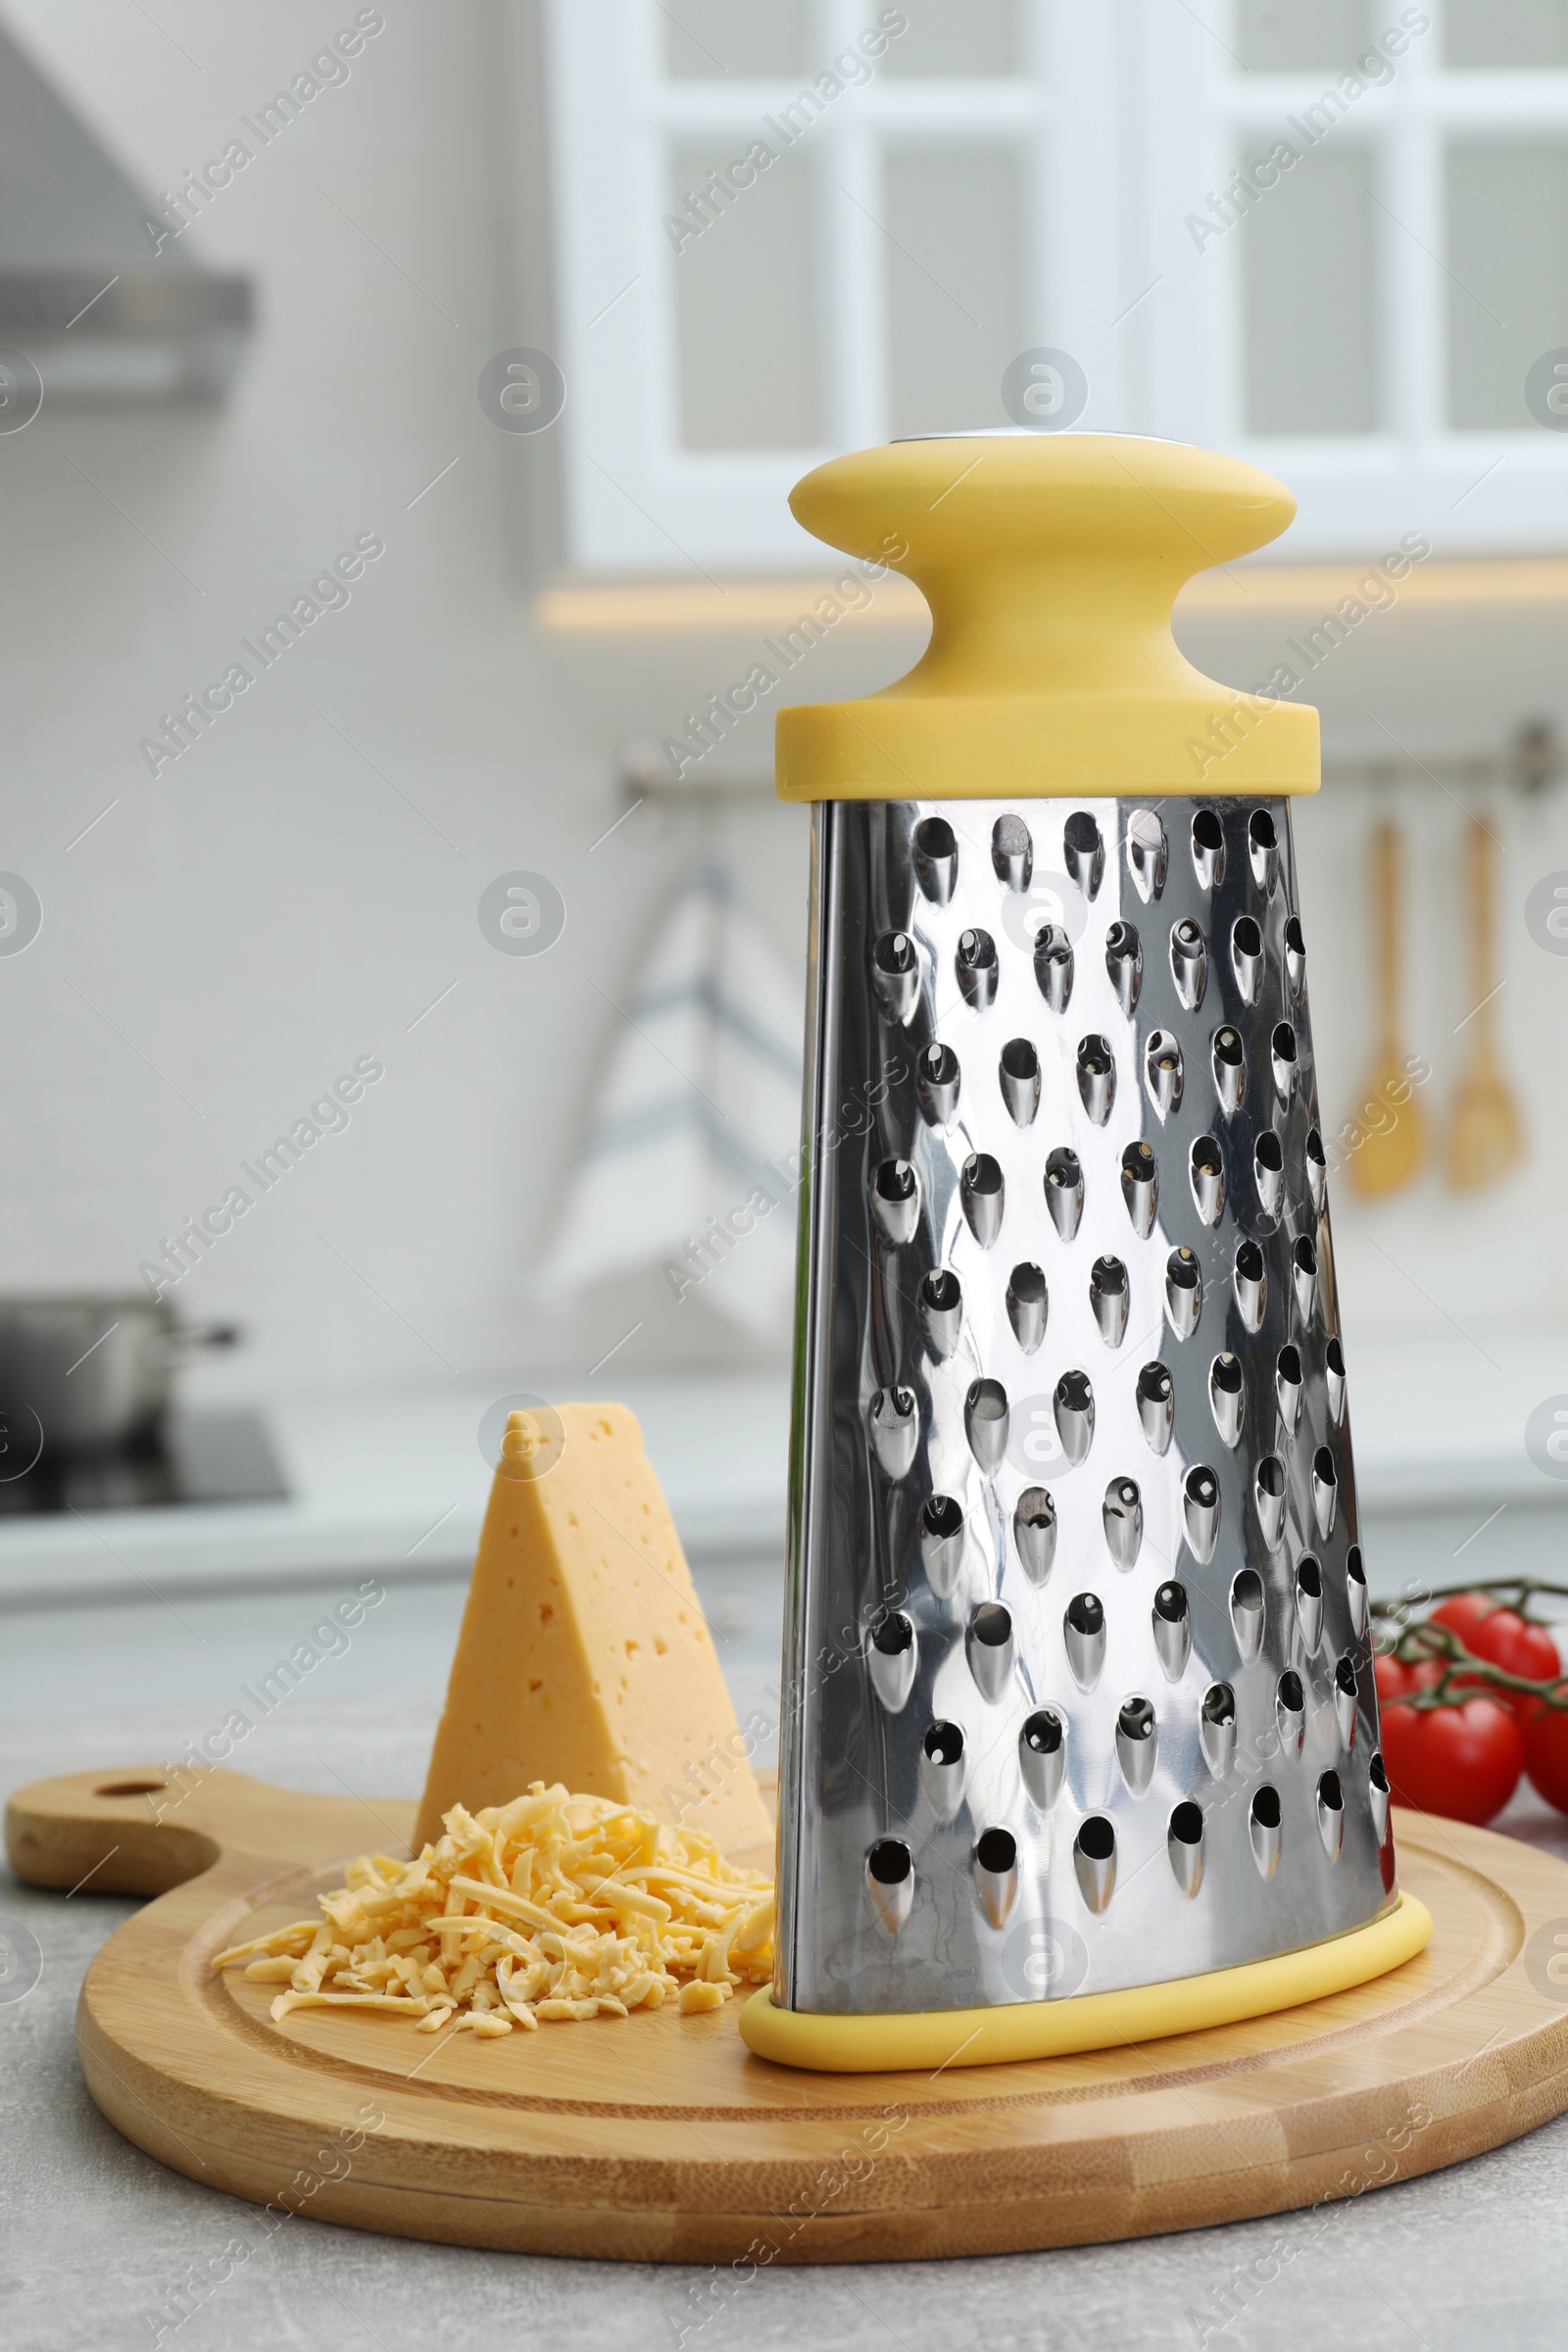 Photo of Grater and cheese on table in kitchen